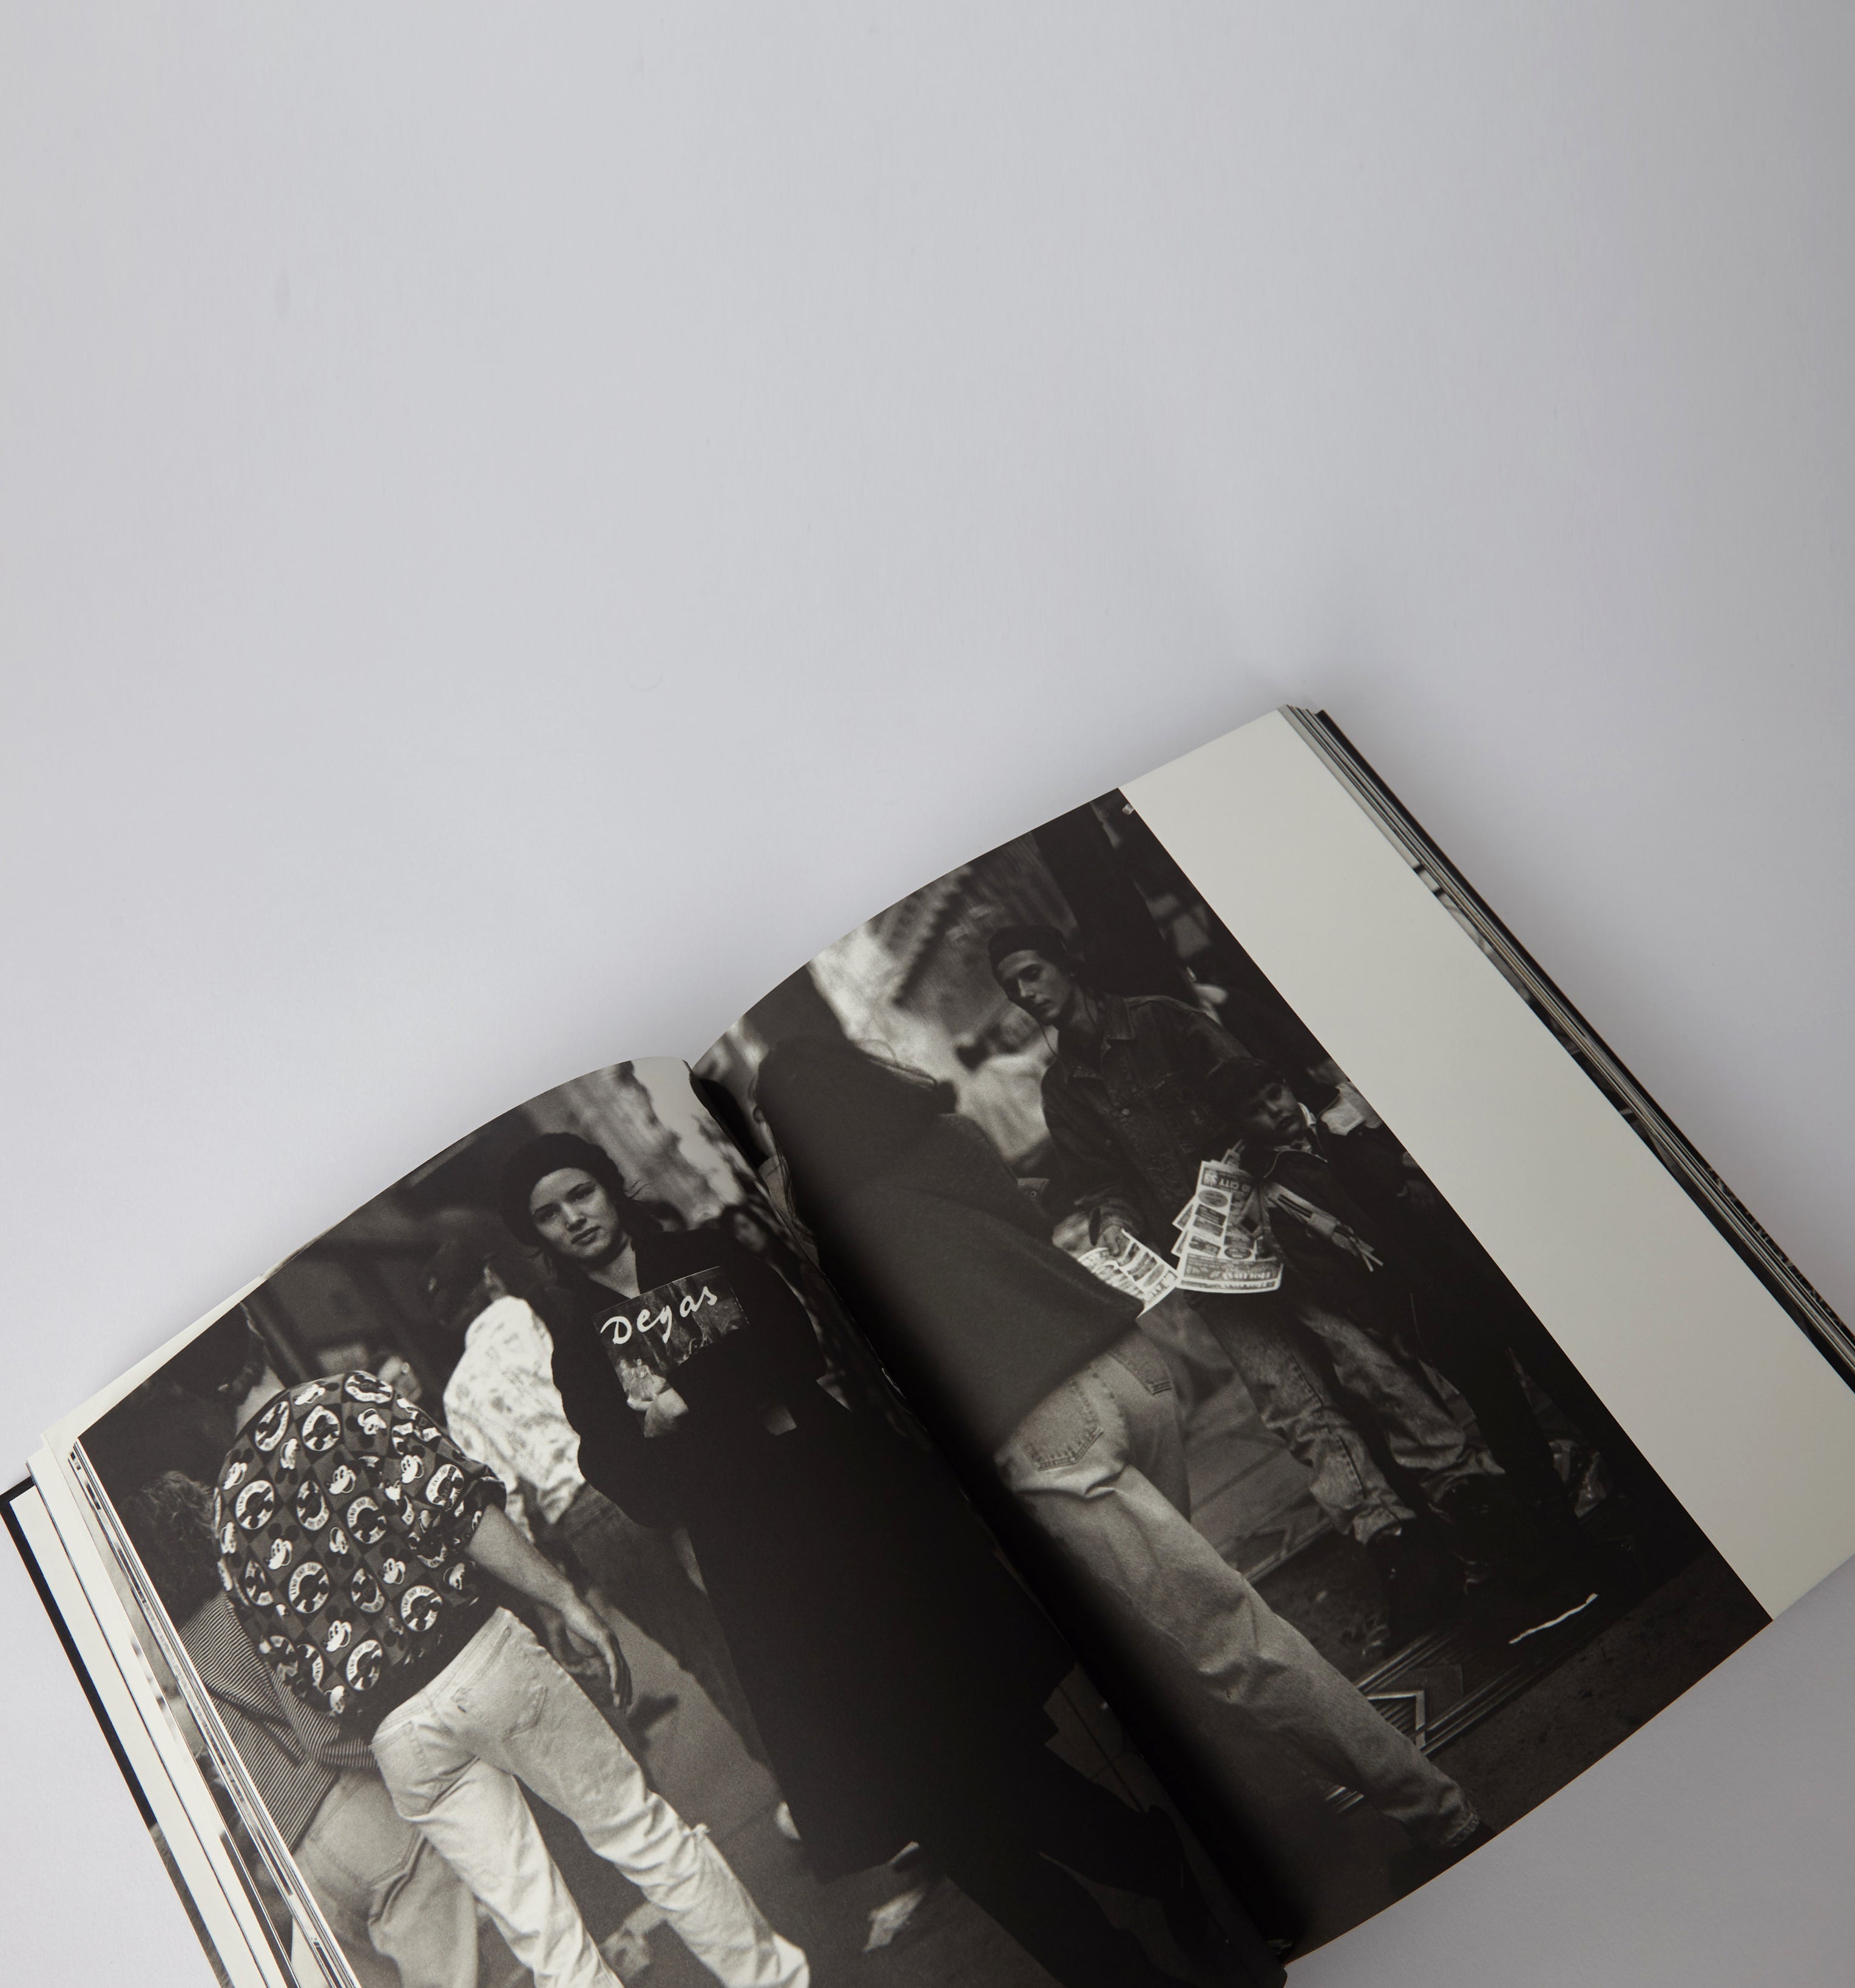 Bruce Weber - Branded Youth and Other Stories (1997) – RECORD 28 BOOKS